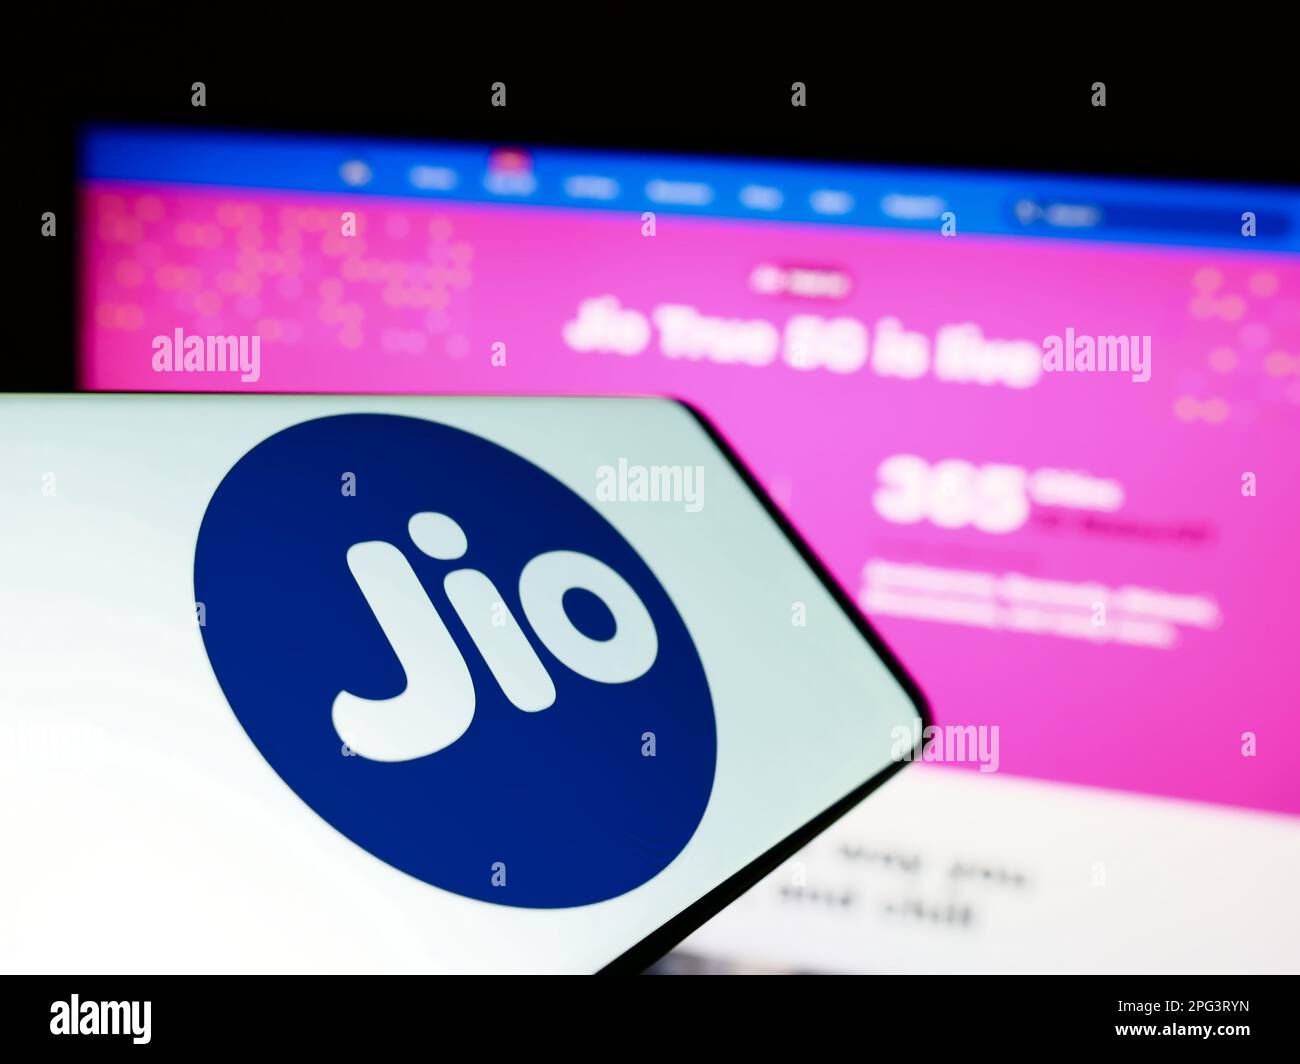 Mobile phone with logo of Indian telecommunications company Reliance Jio on screen in front of website. Focus on center-left of phone display. Stock Photo